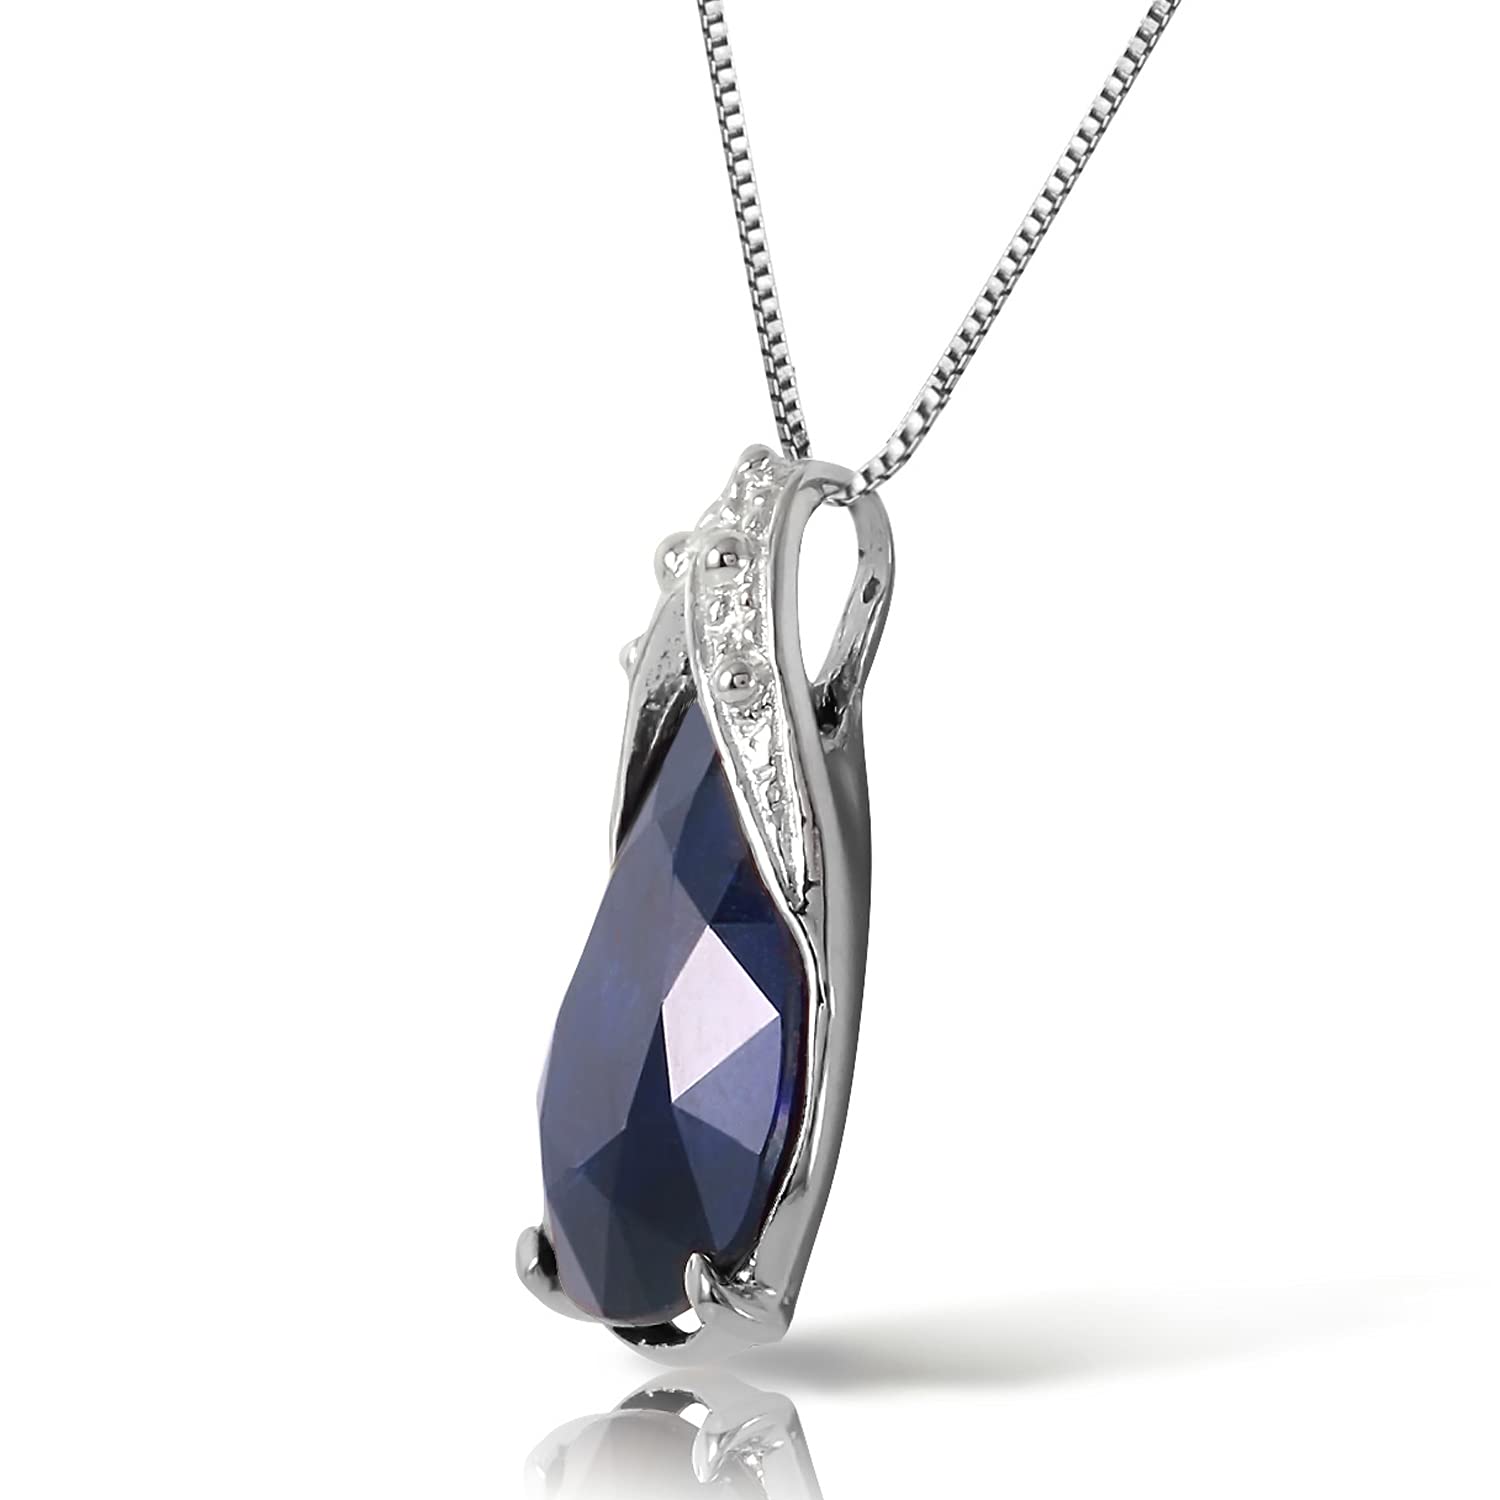 Galaxy Gold GG 14k Solid White Gold Necklace with 4.65 Carat Natural Sapphire Pendant